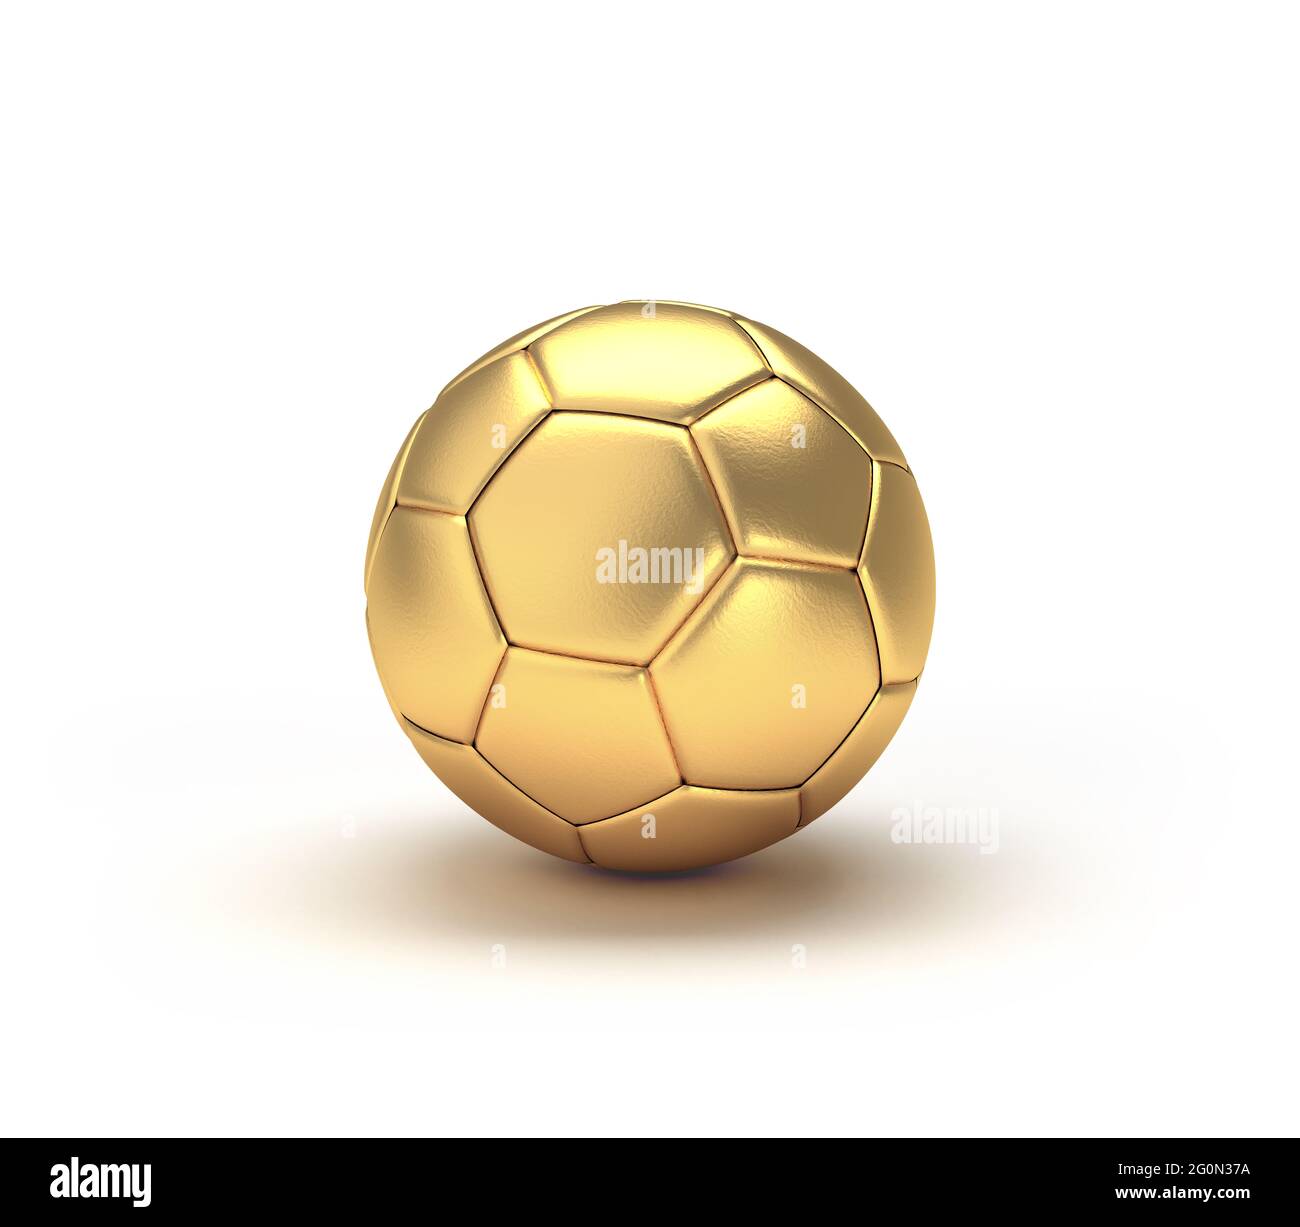 Gold soccer ball isolated on white background. 3D illustration. Stock Photo